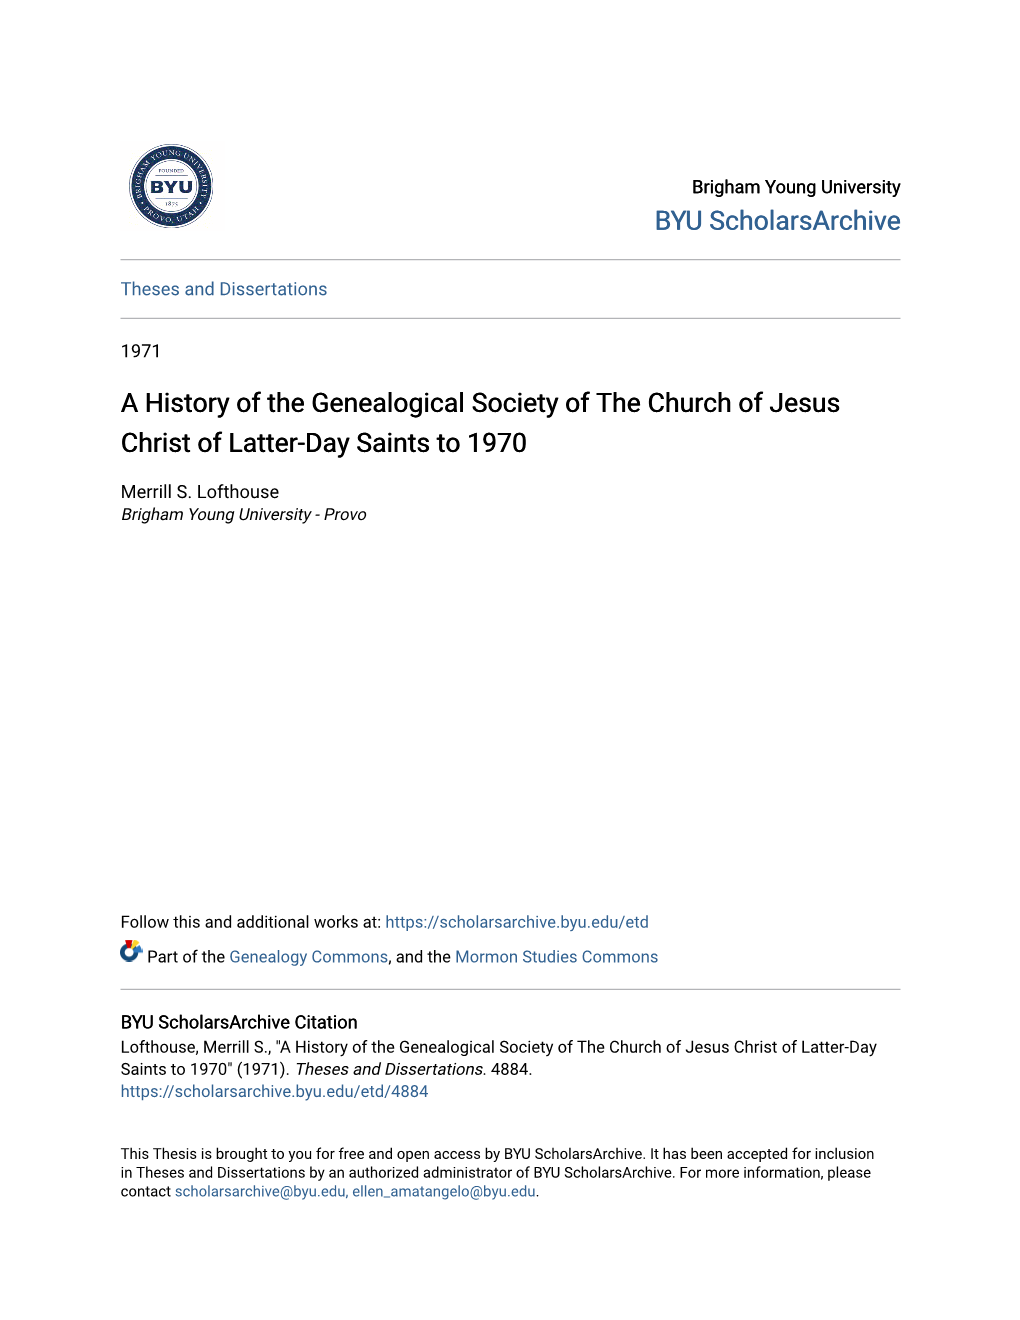 A History of the Genealogical Society of the Church of Jesus Christ of Latter-Day Saints to 1970